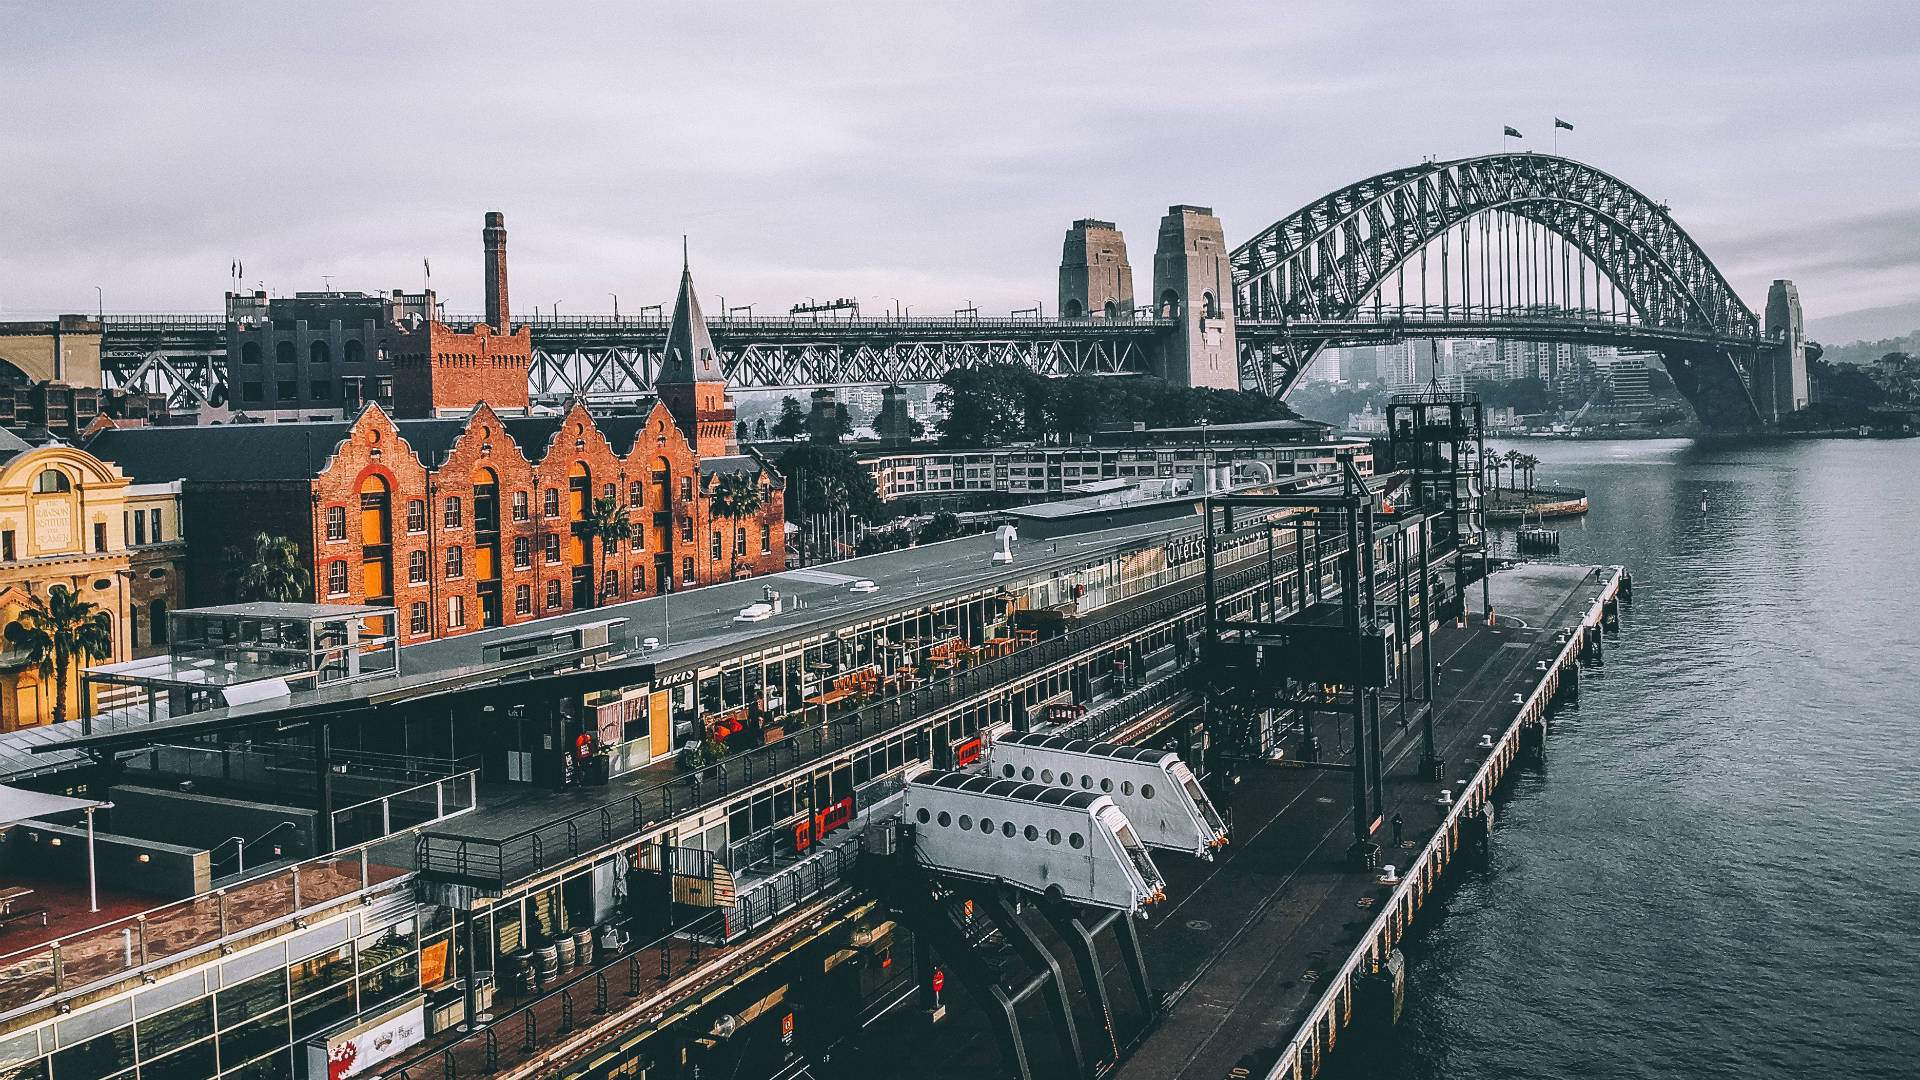 This Cost of Living Report Says Sydney Is No Longer One of the World's Ten Most Expensive Cities